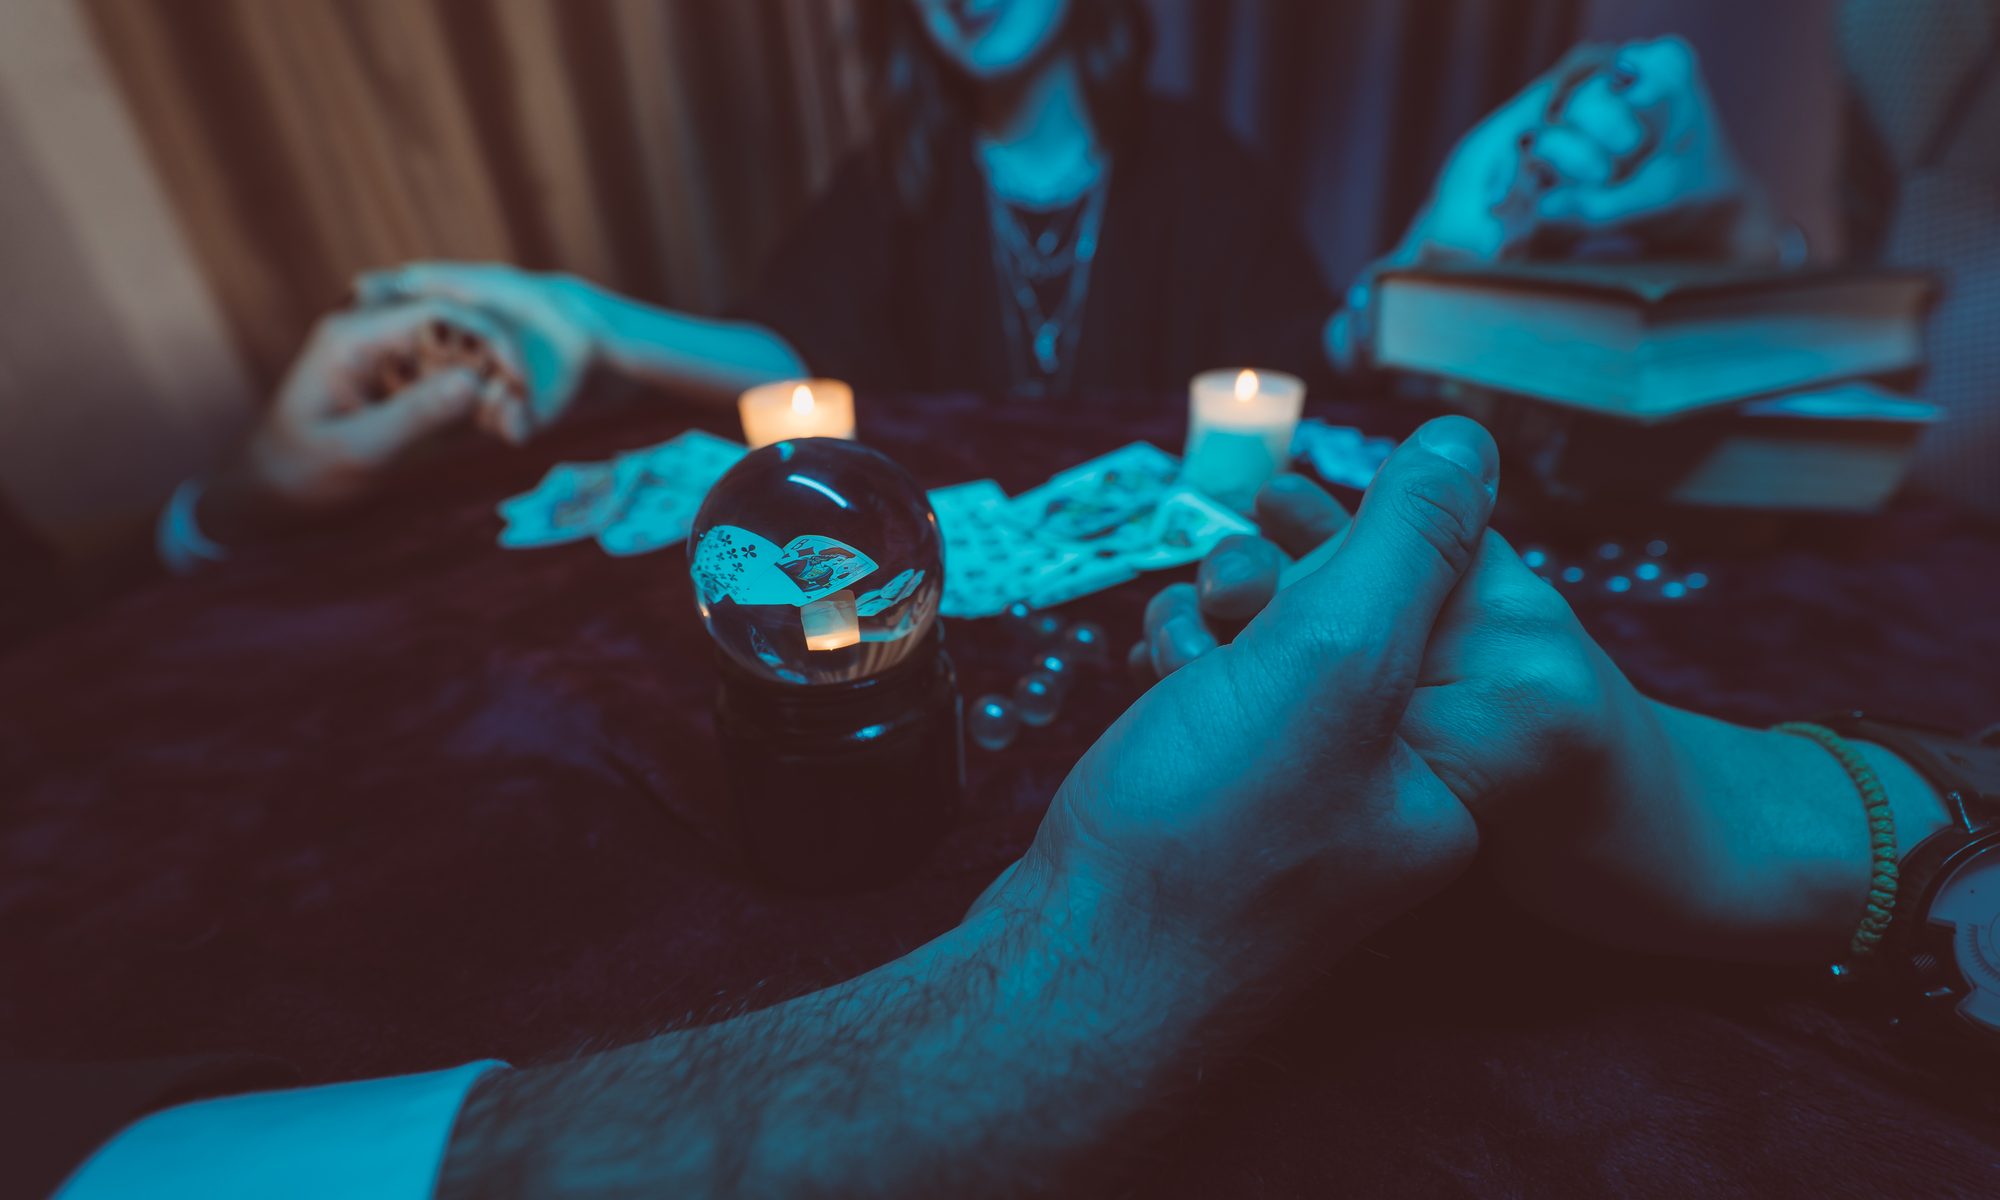 photograph of patrons holding hands at seance